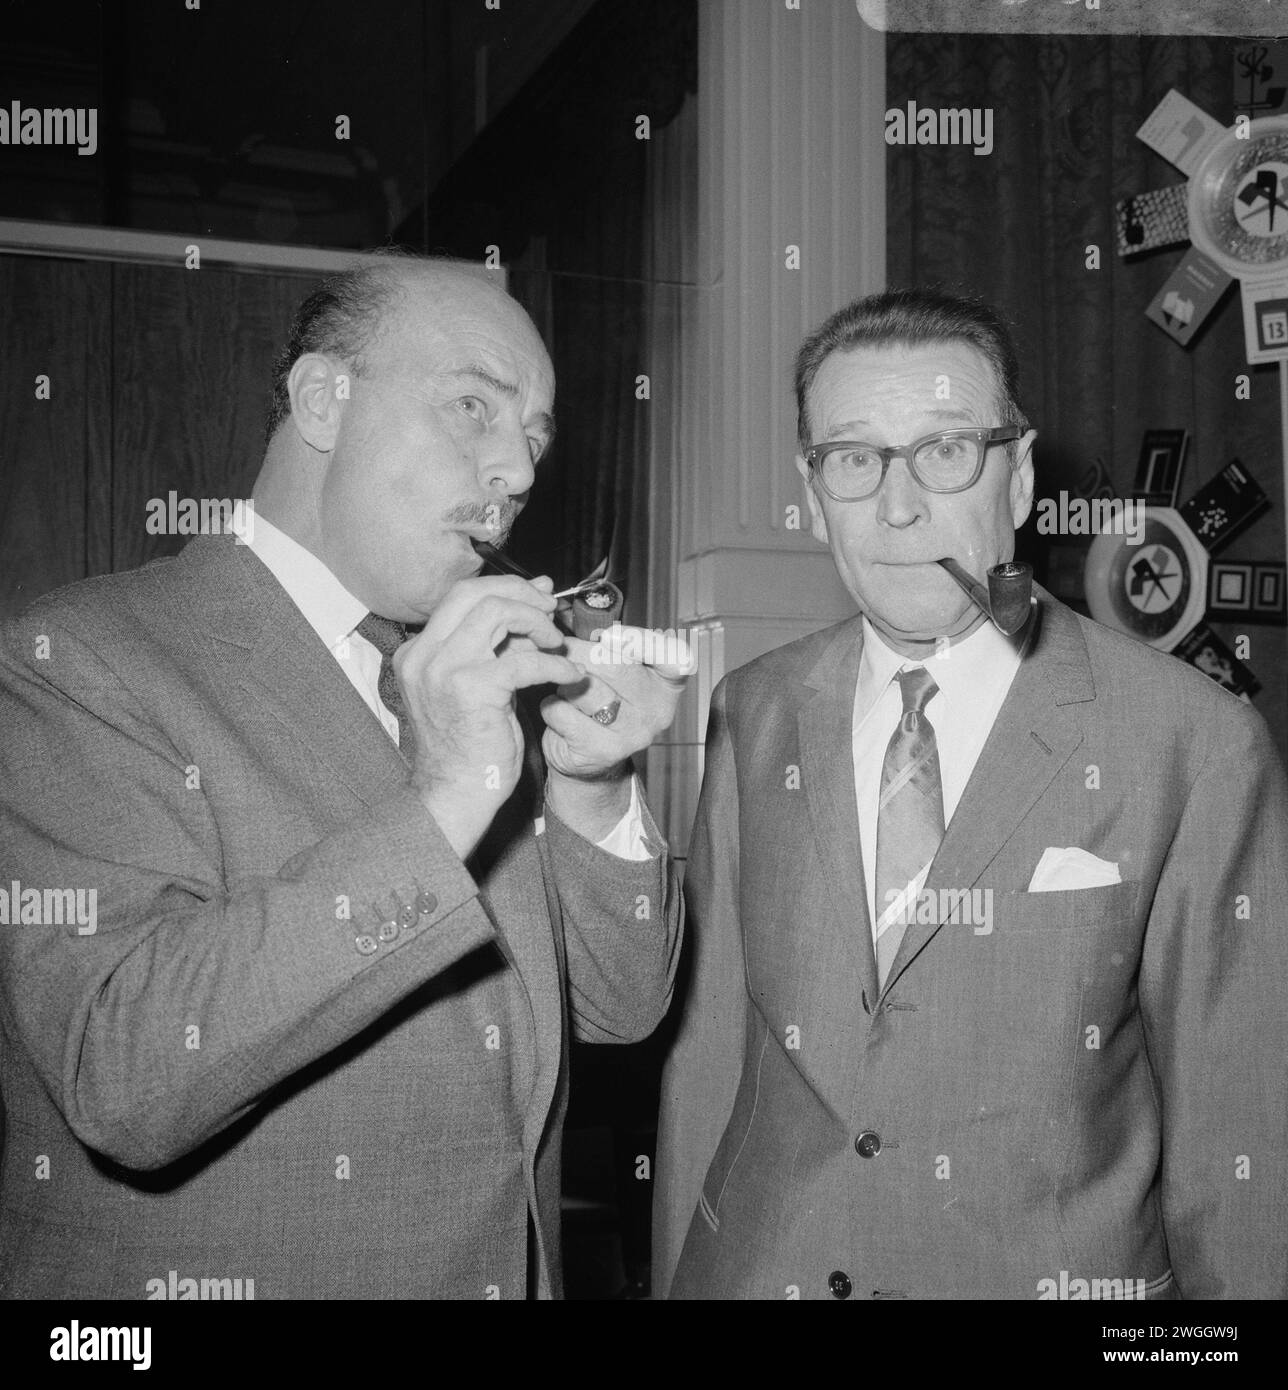 November 2, 1966. Amsterdam, Netherlands.  The Belgian author Georges Simenon (right) in Amsterdam, meeting Dutch actor Jan Teulings (left) at the statue of Maigret in the Amstel hotel. Jan Teulings was the Dutch personification of Inspector Maigret in the television series of the same name. Stock Photo